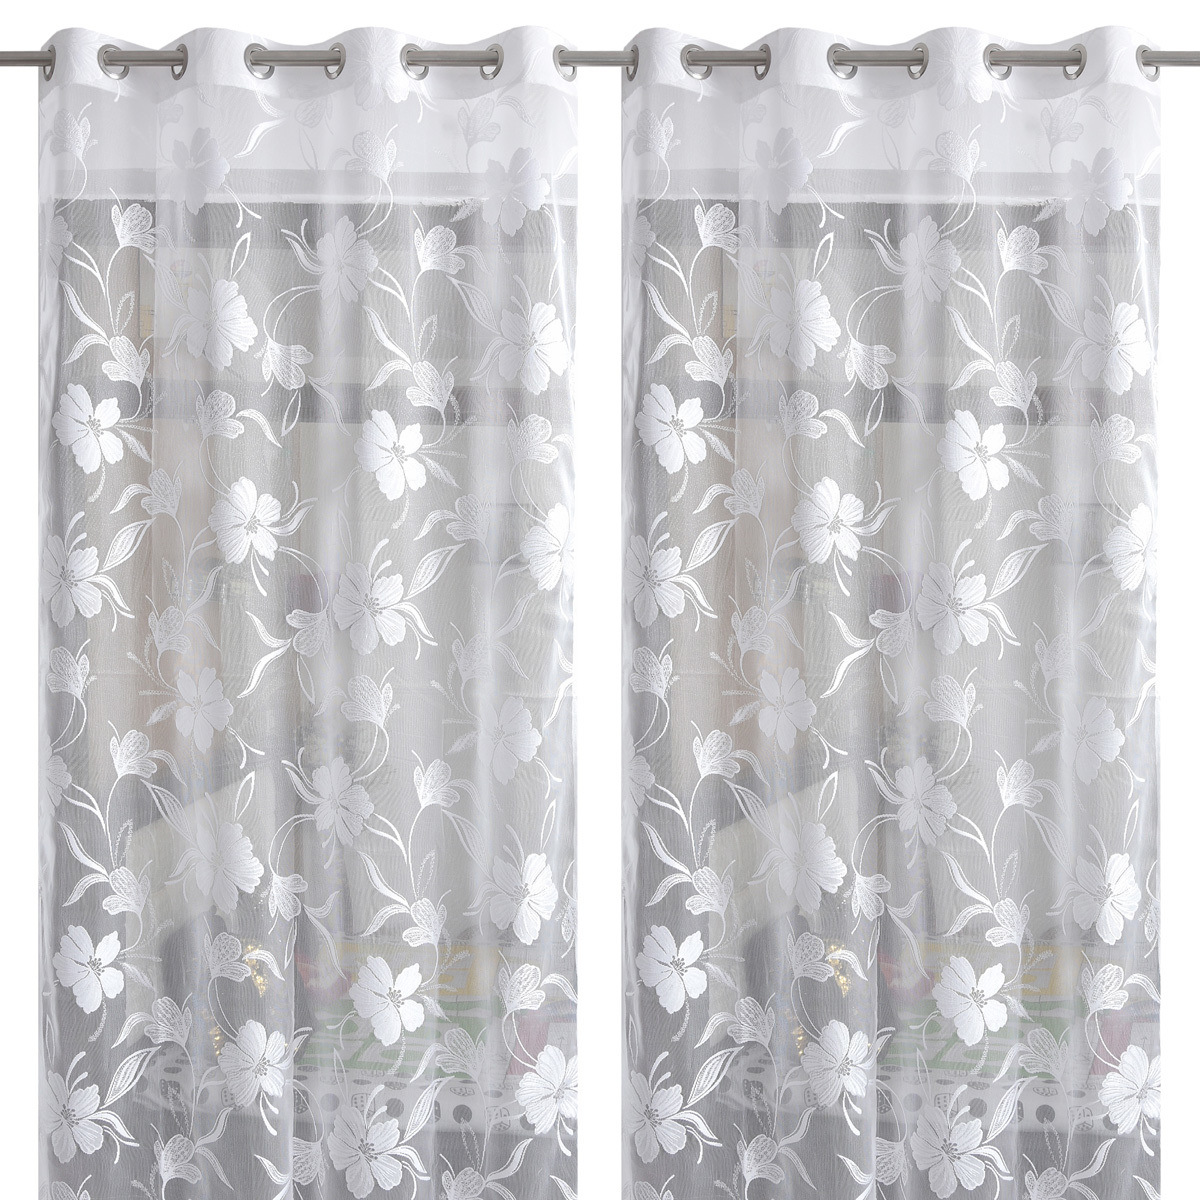 HANDTEX HOME Sheer White Net Curtains With Beautiful Embroidered Floral Designs for Door 4ft x 7ft Set of 2 SP06